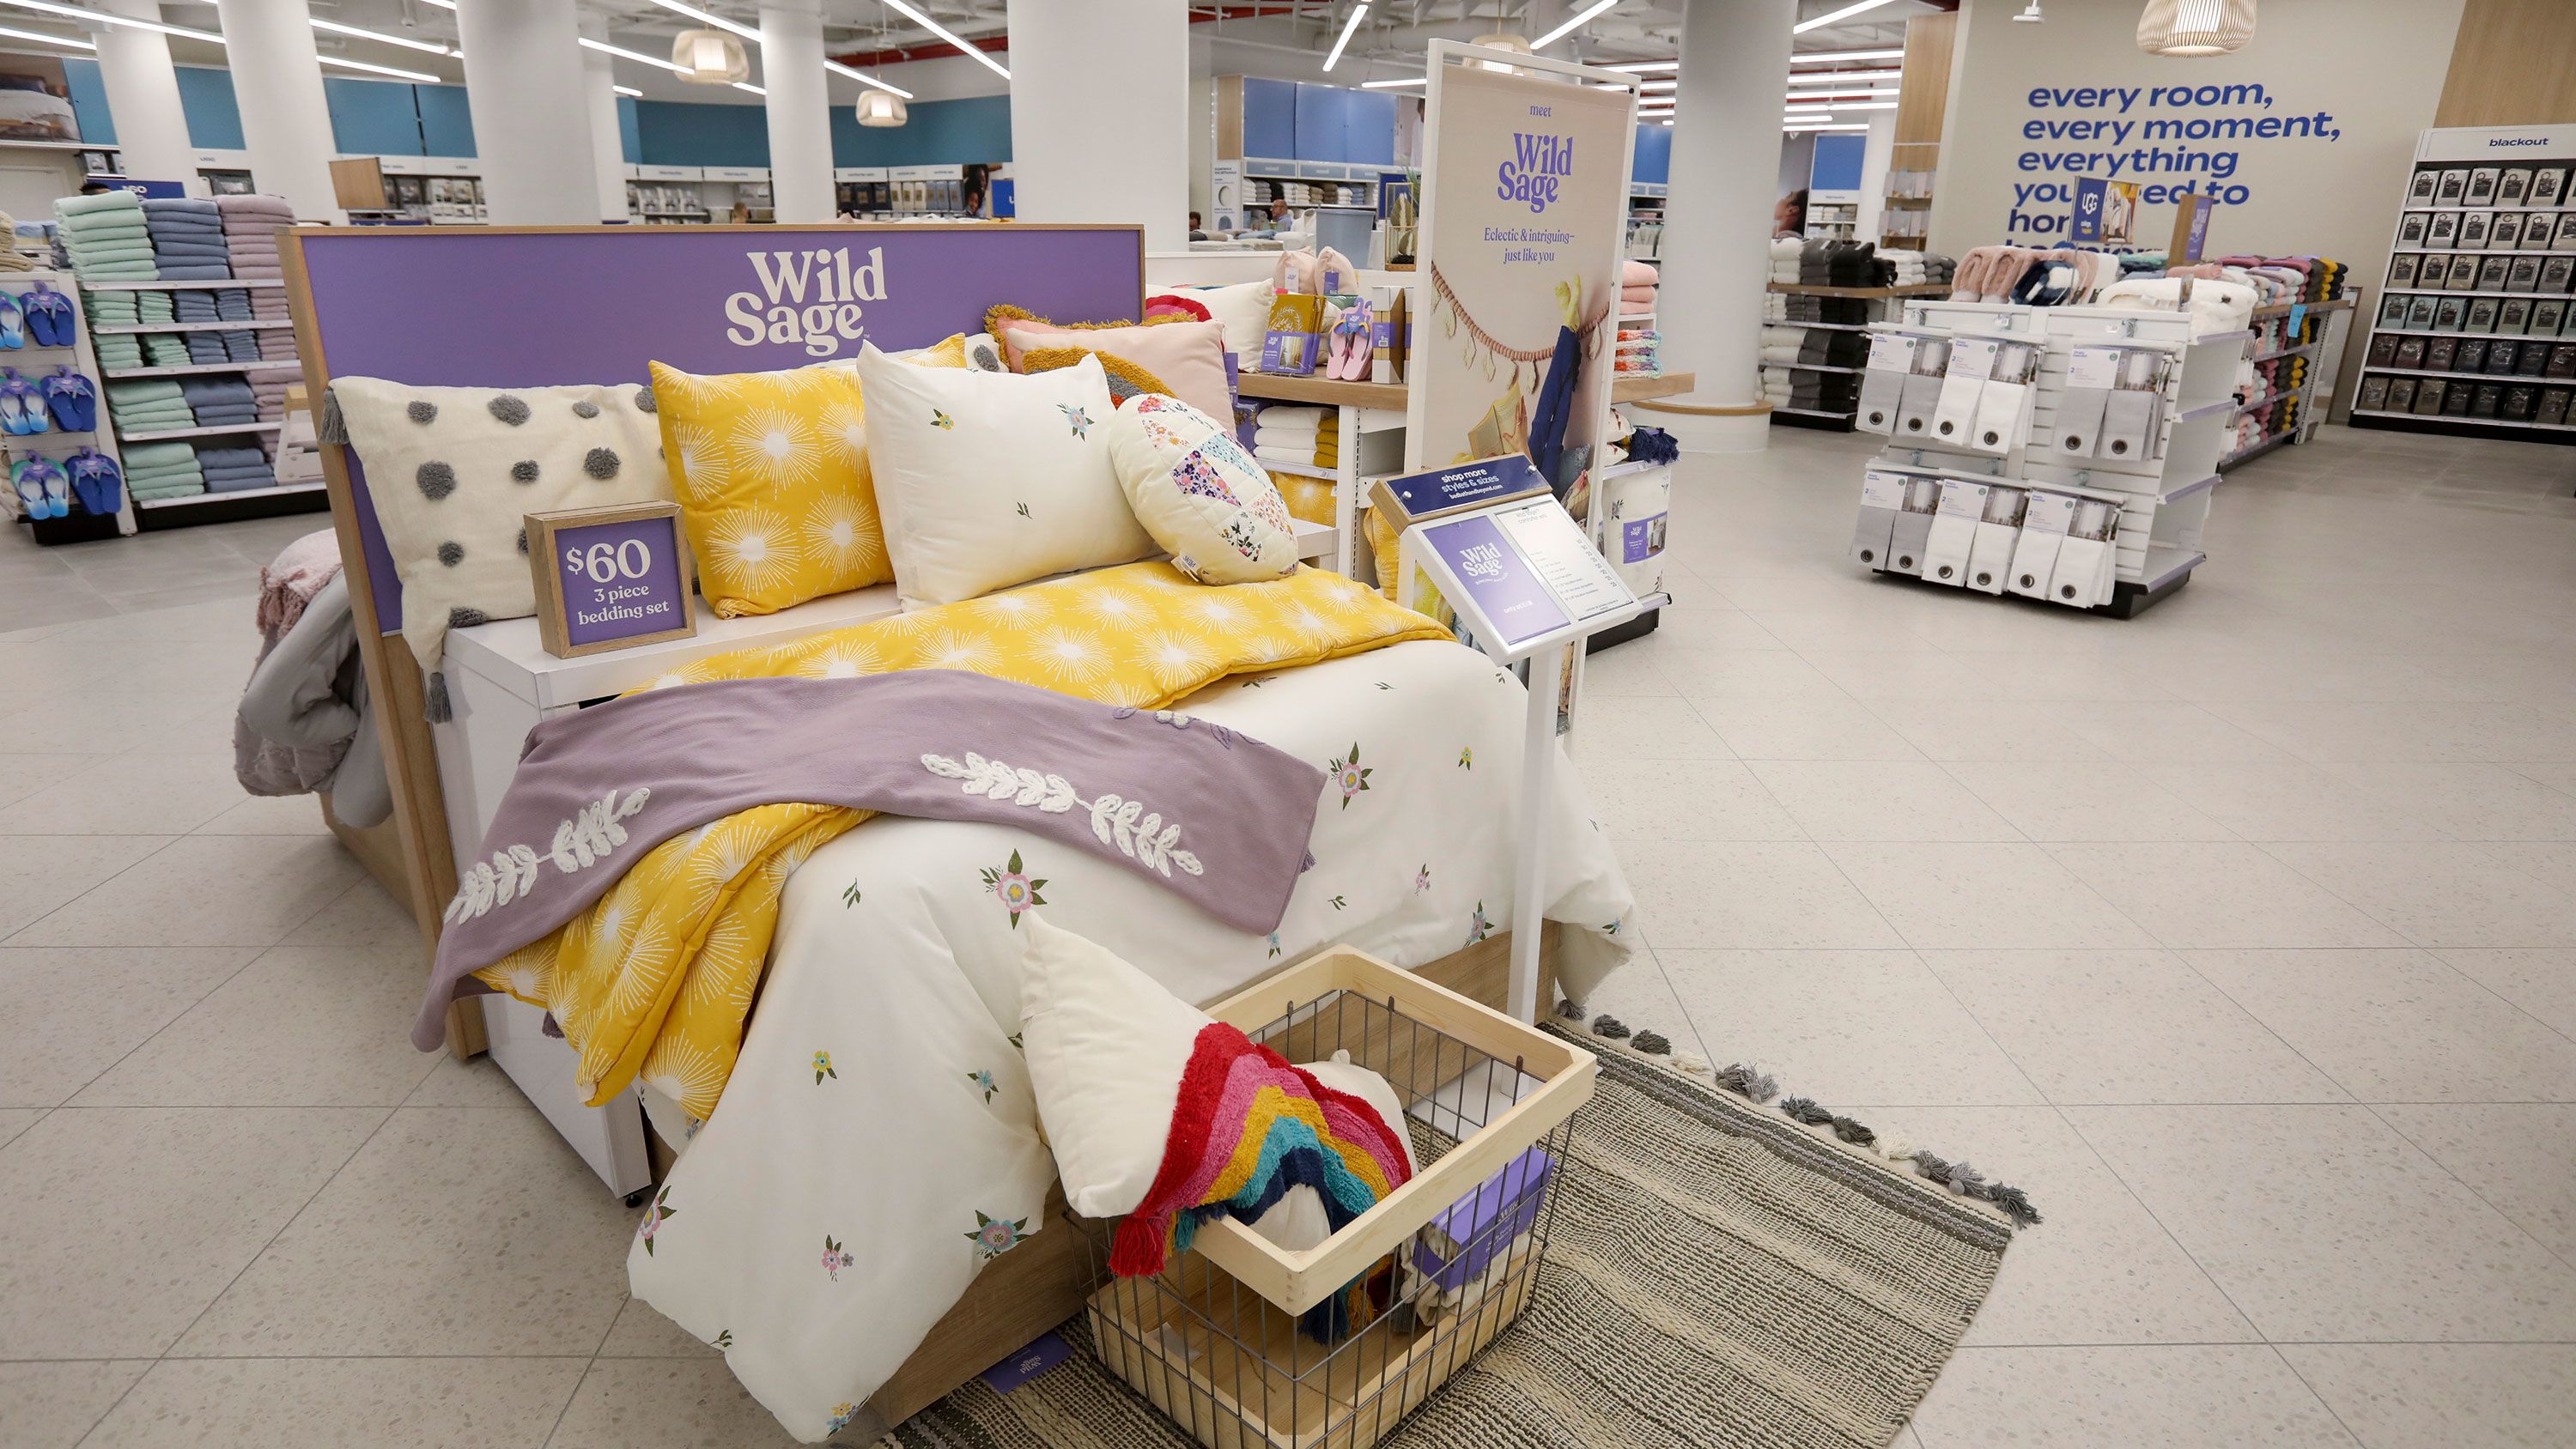 Bed Bath & Beyond's stores have always been chaotic. Now it's